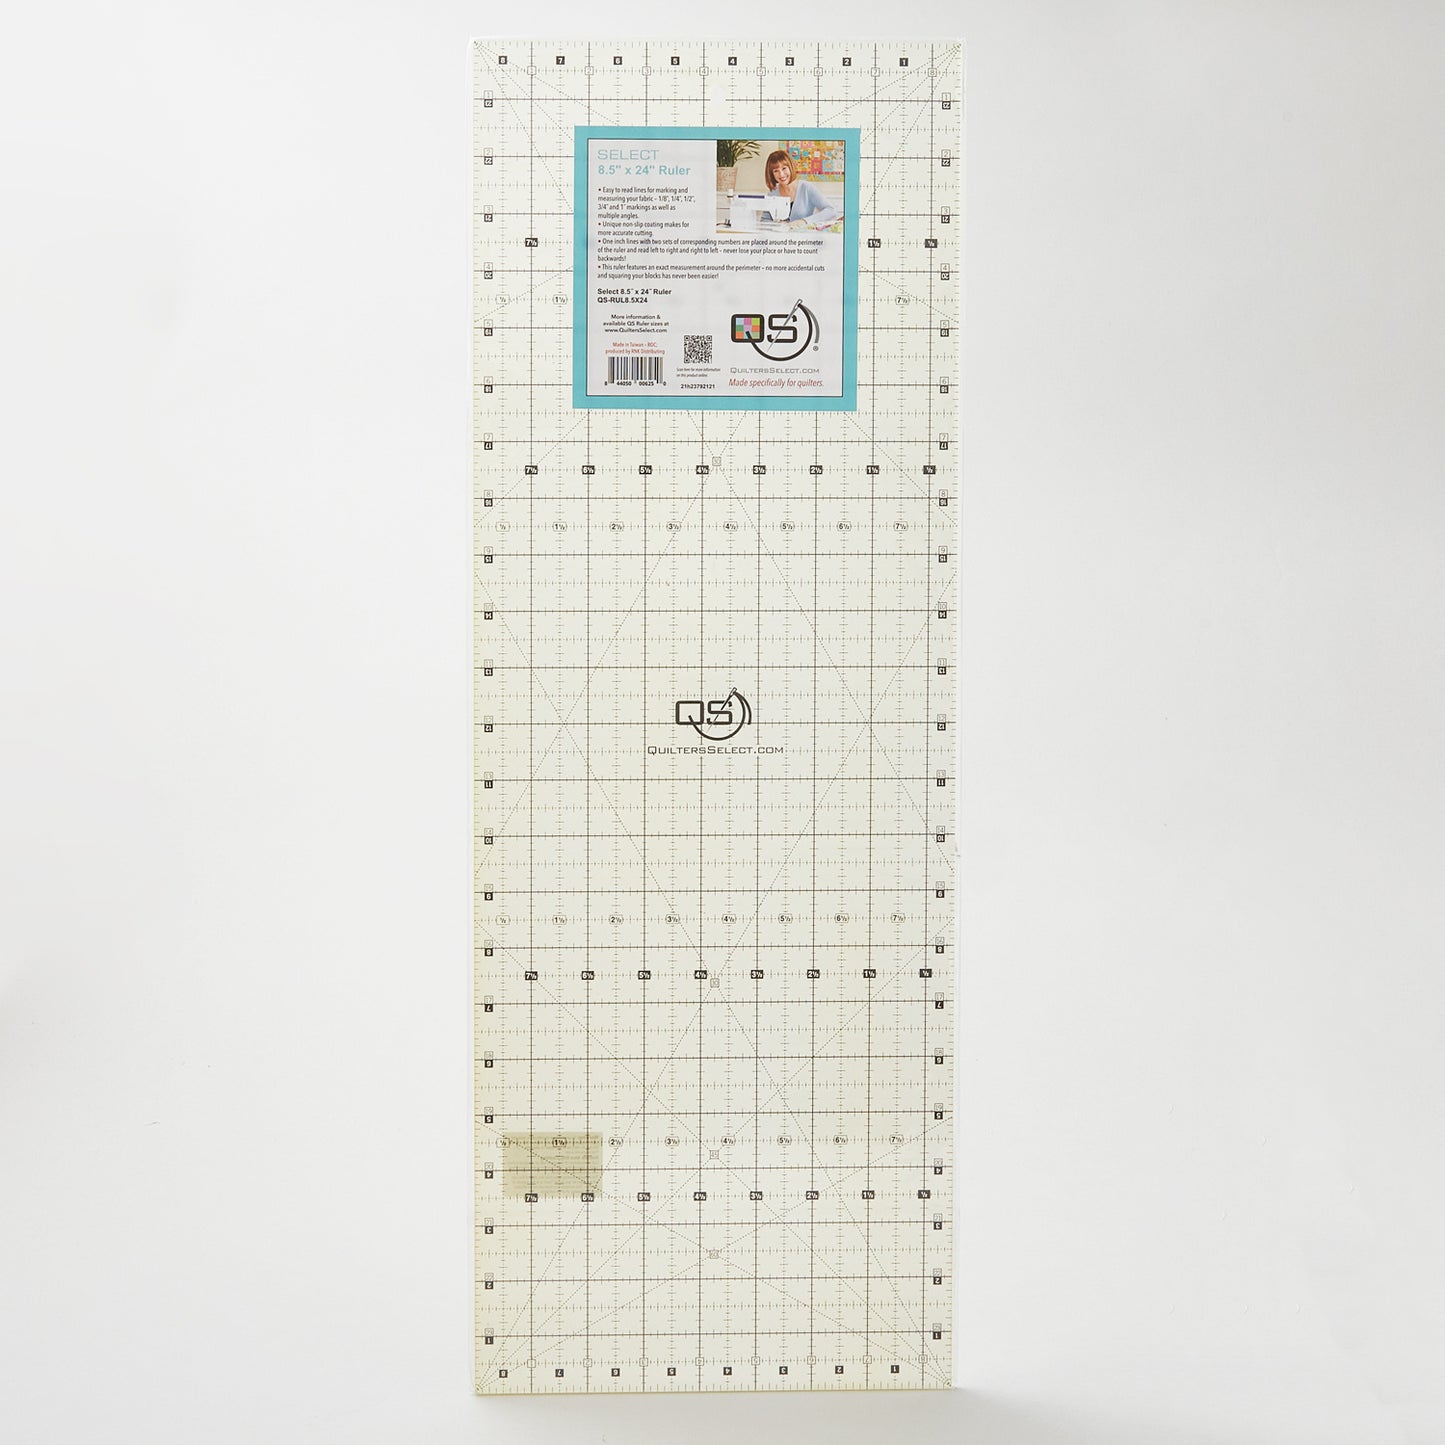 Quilters Select Non-Slip Ruler - 8.5" x 24" Alternative View #1